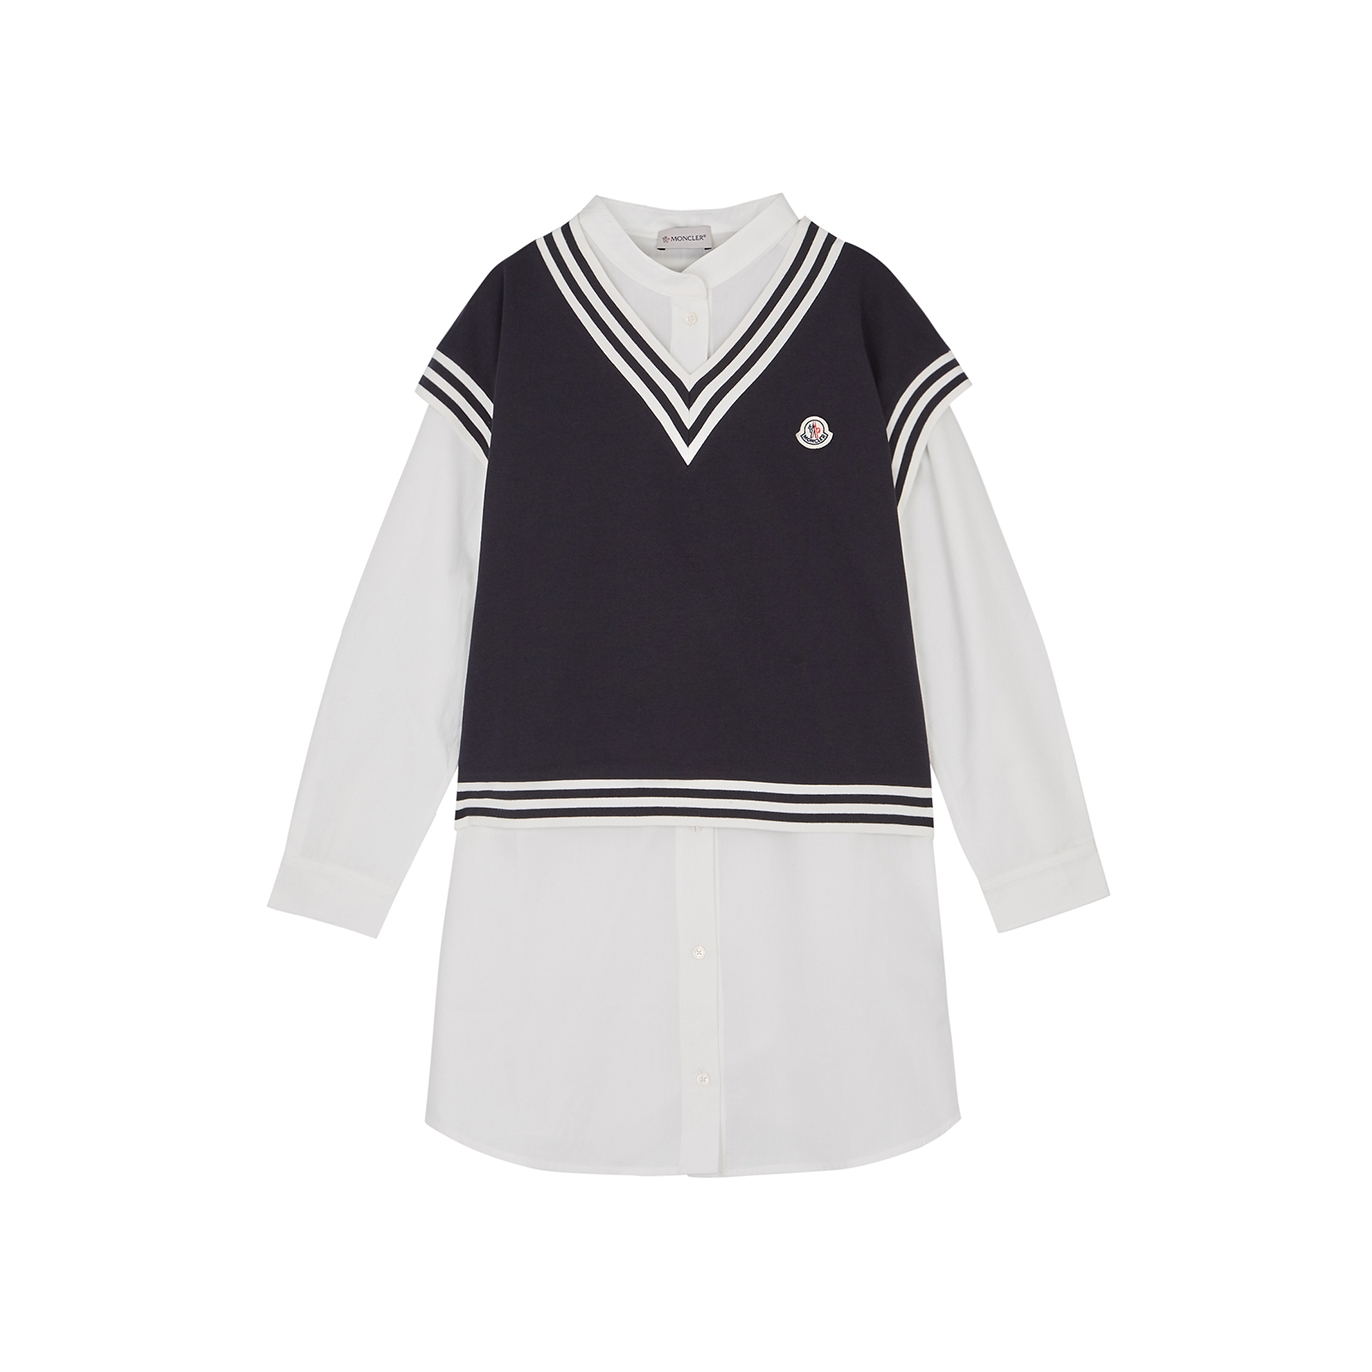 Moncler Kids Navy And White Cotton Shirt And Vest Set (12-14 Years) - Navy & Other